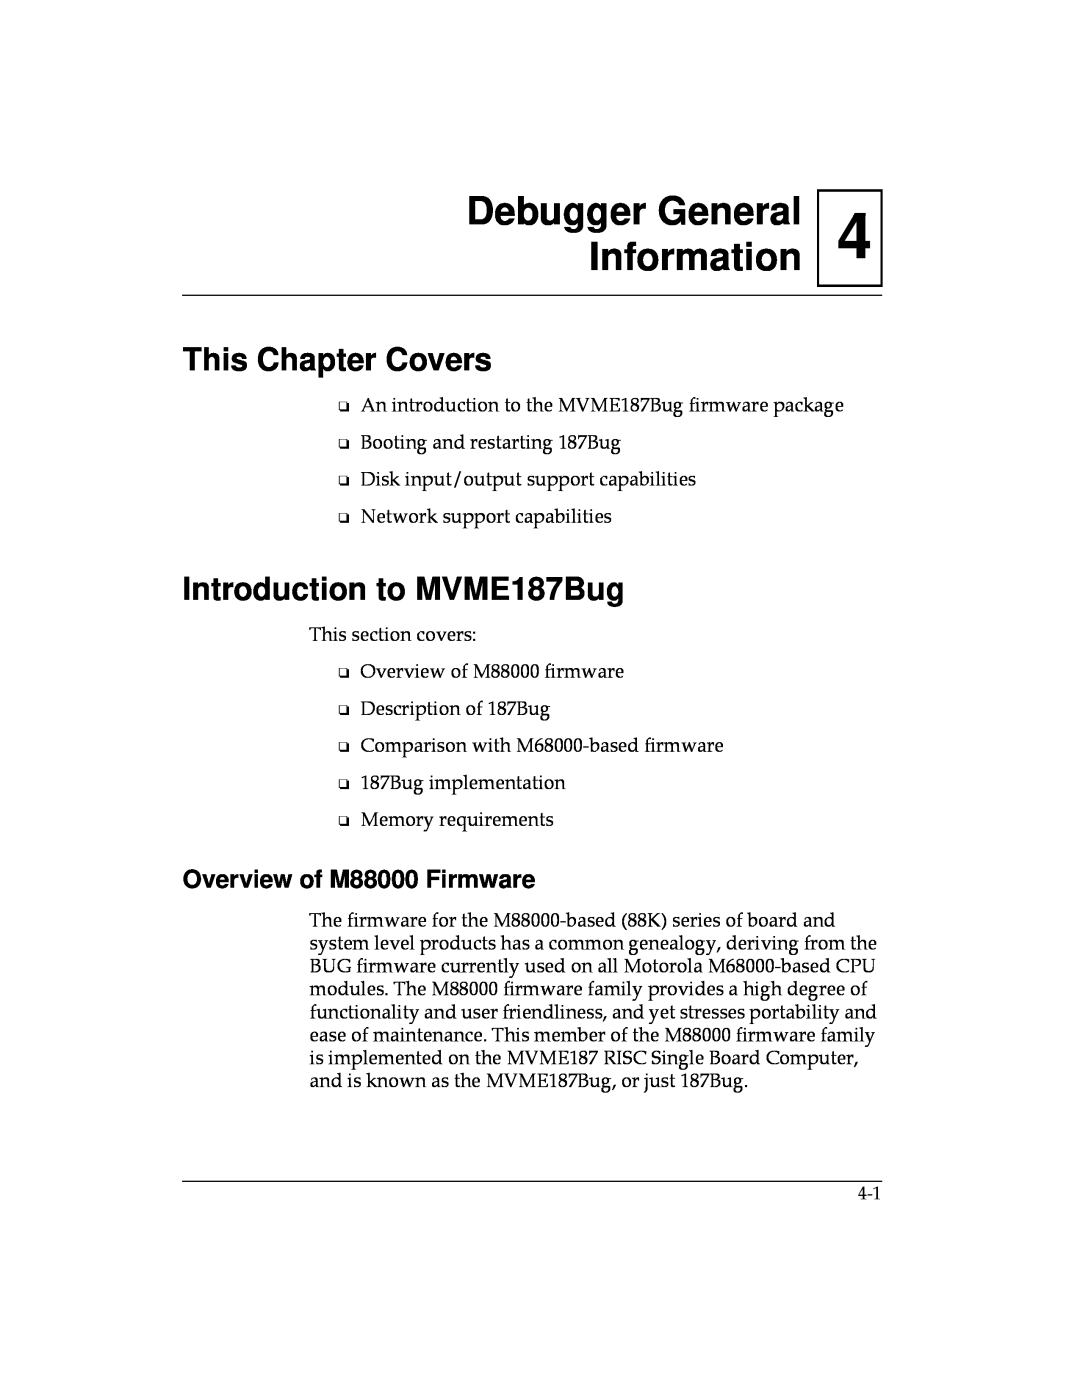 Motorola Debugger General Information, Introduction to MVME187Bug, Overview of M88000 Firmware, This Chapter Covers 